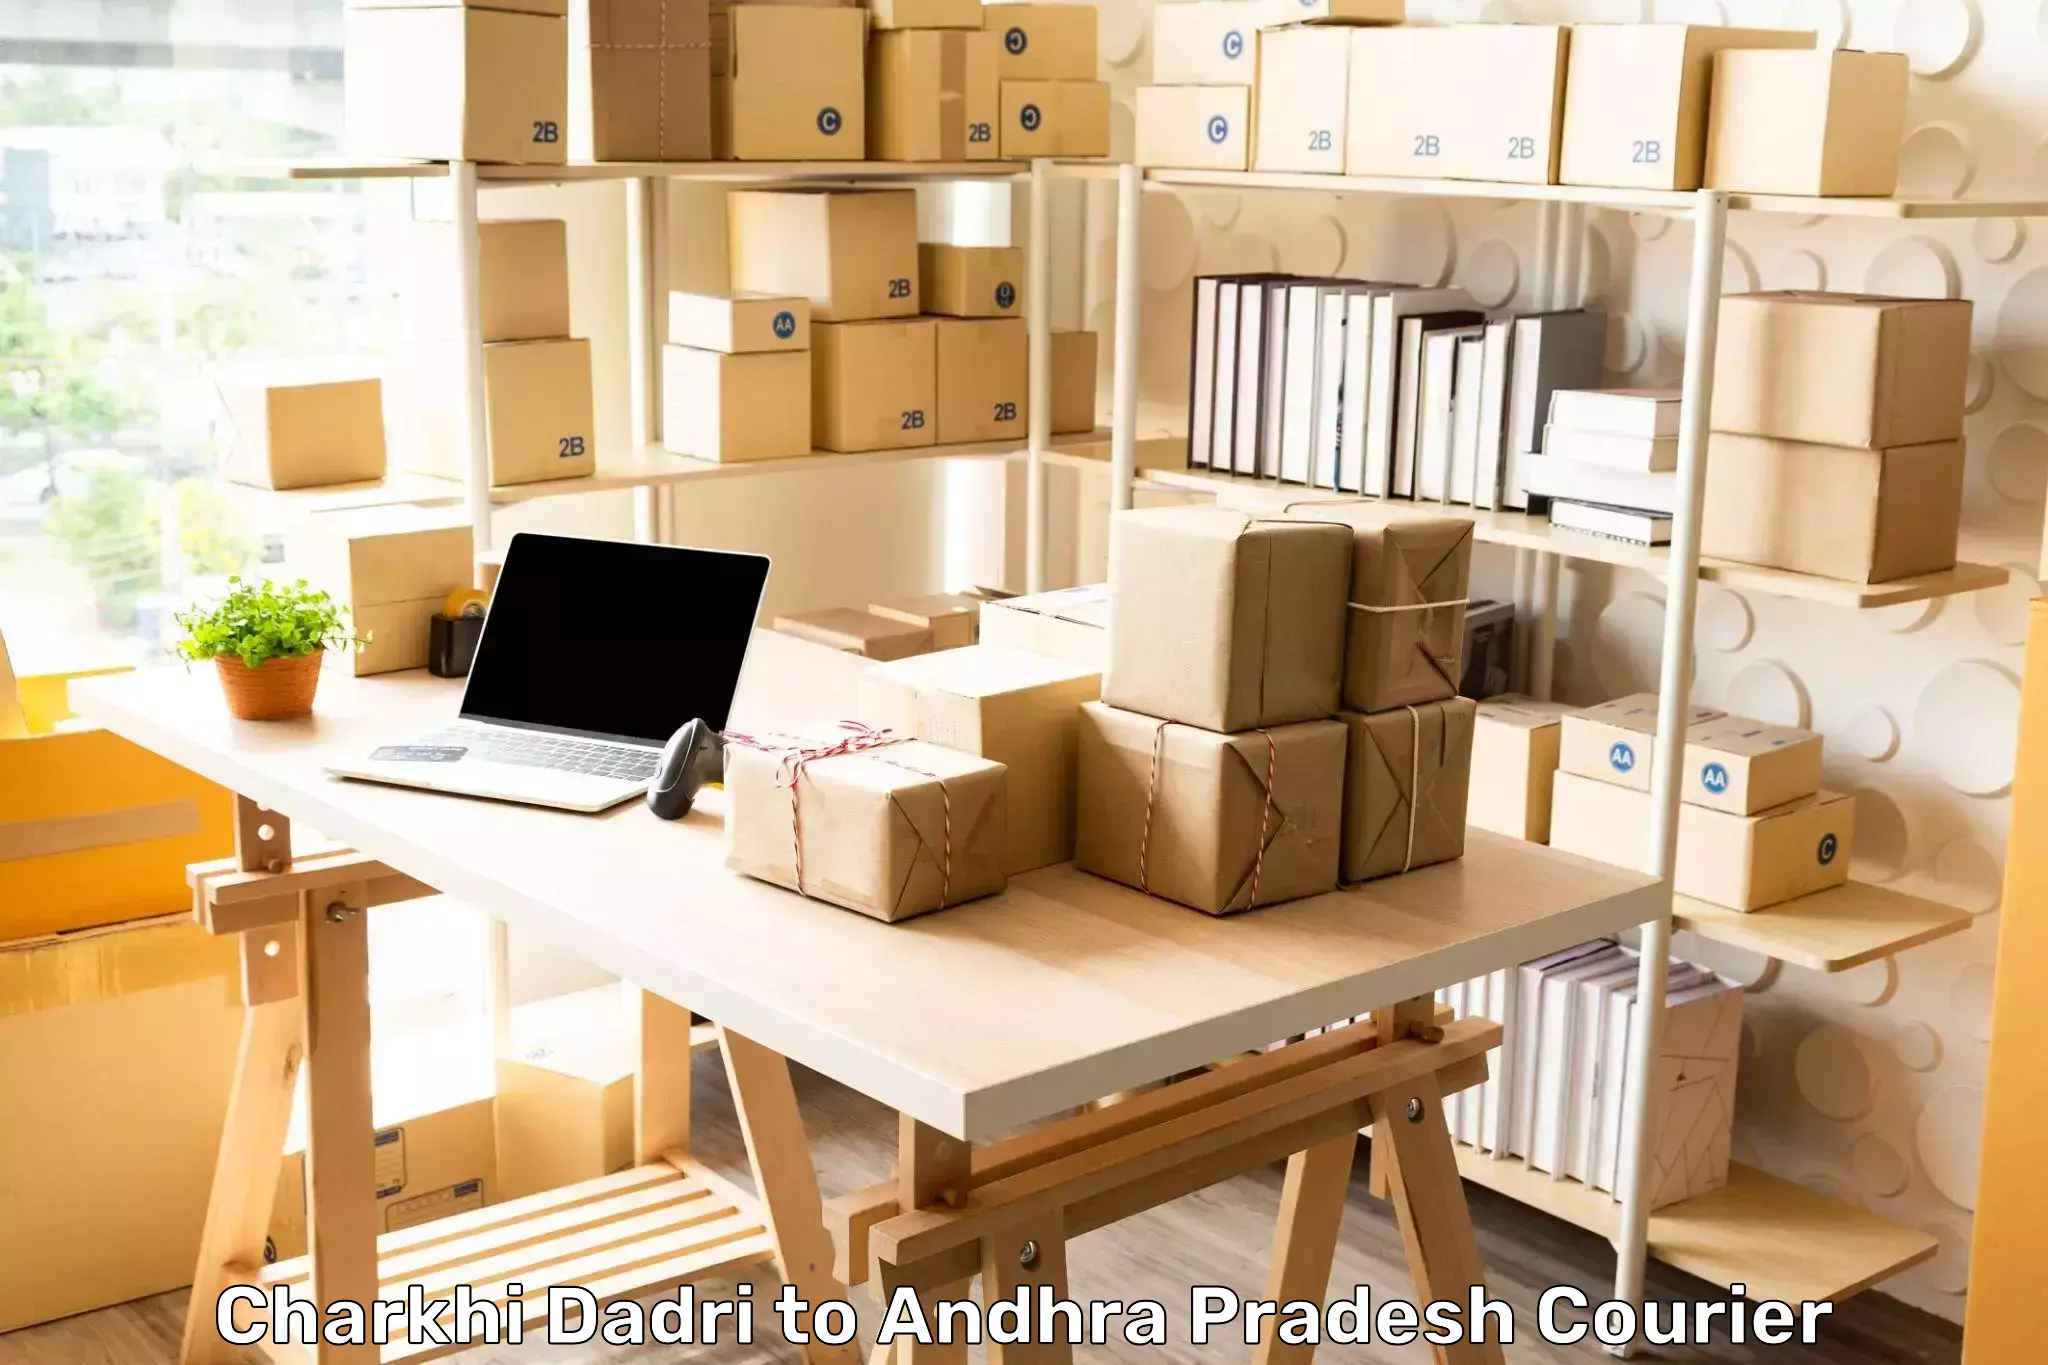 Cost-effective shipping solutions Charkhi Dadri to Gollaprollu